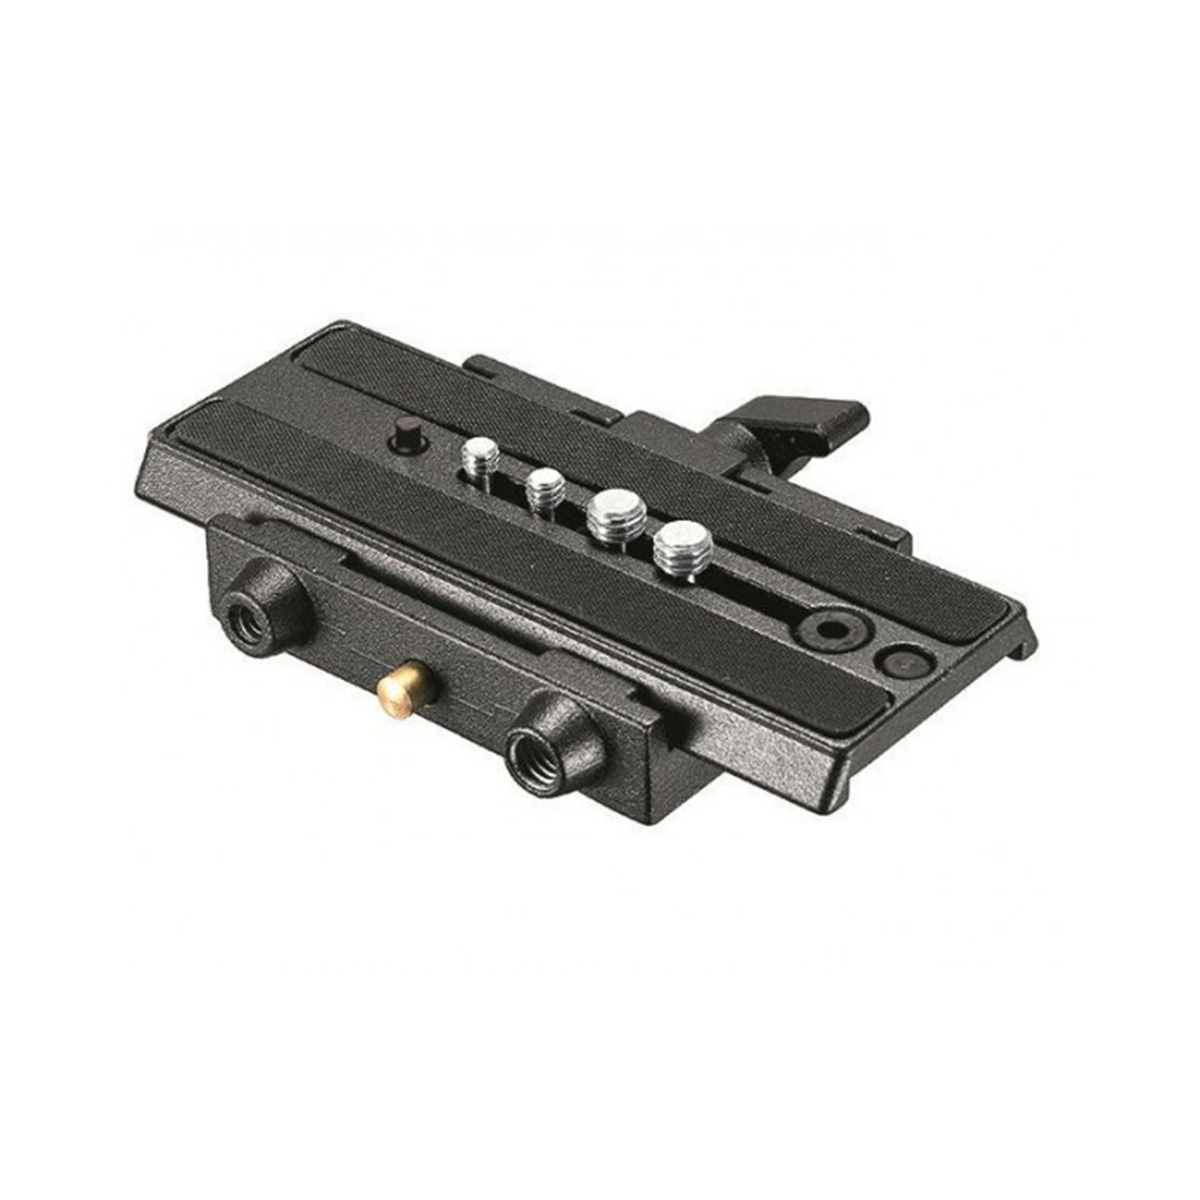 MANFROTTO 357 RAPID CONNECT ADAPTER MIT PLATTE